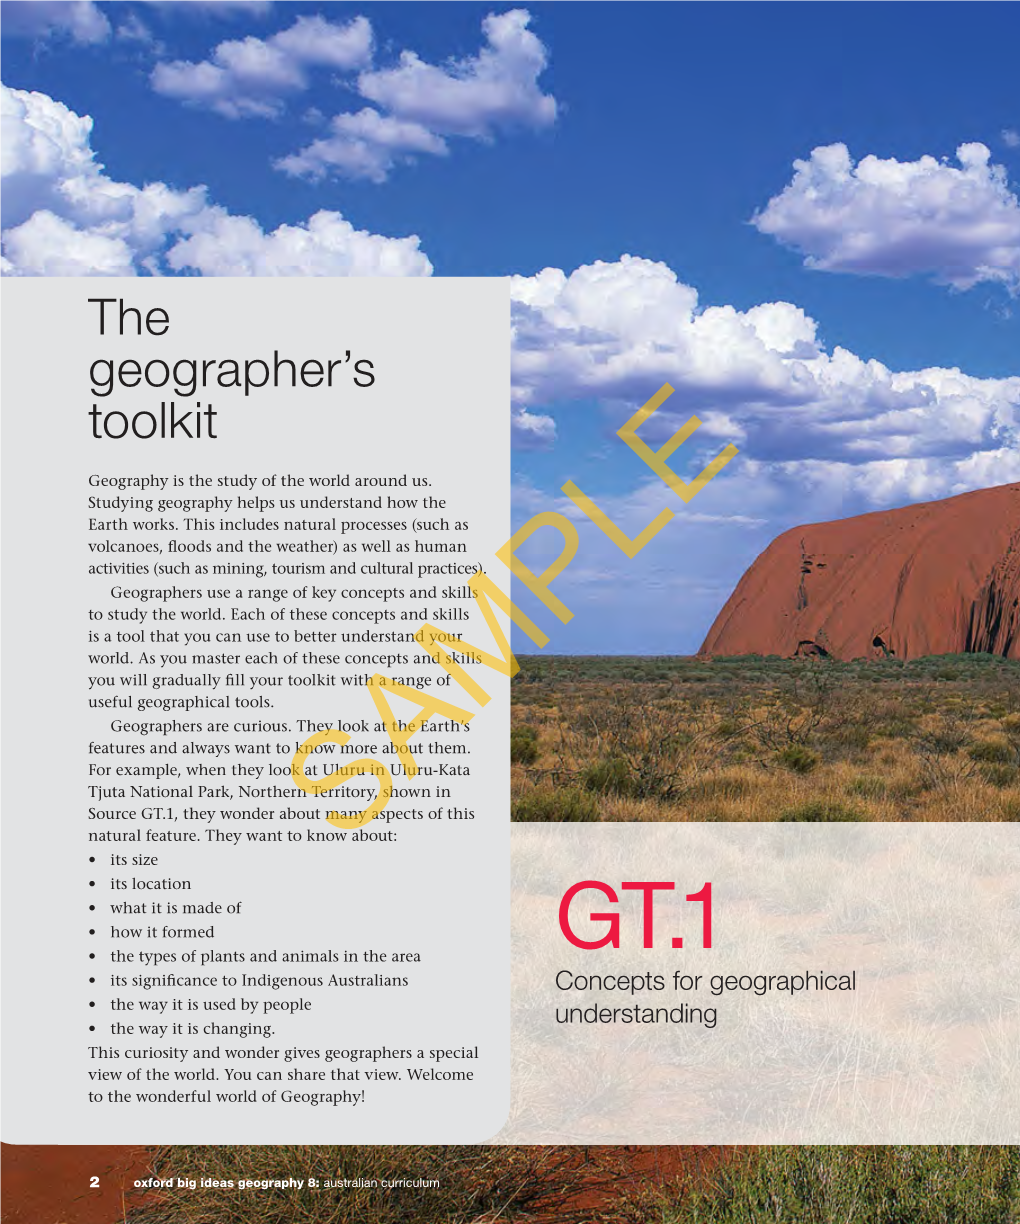 The Geographer's Toolkit